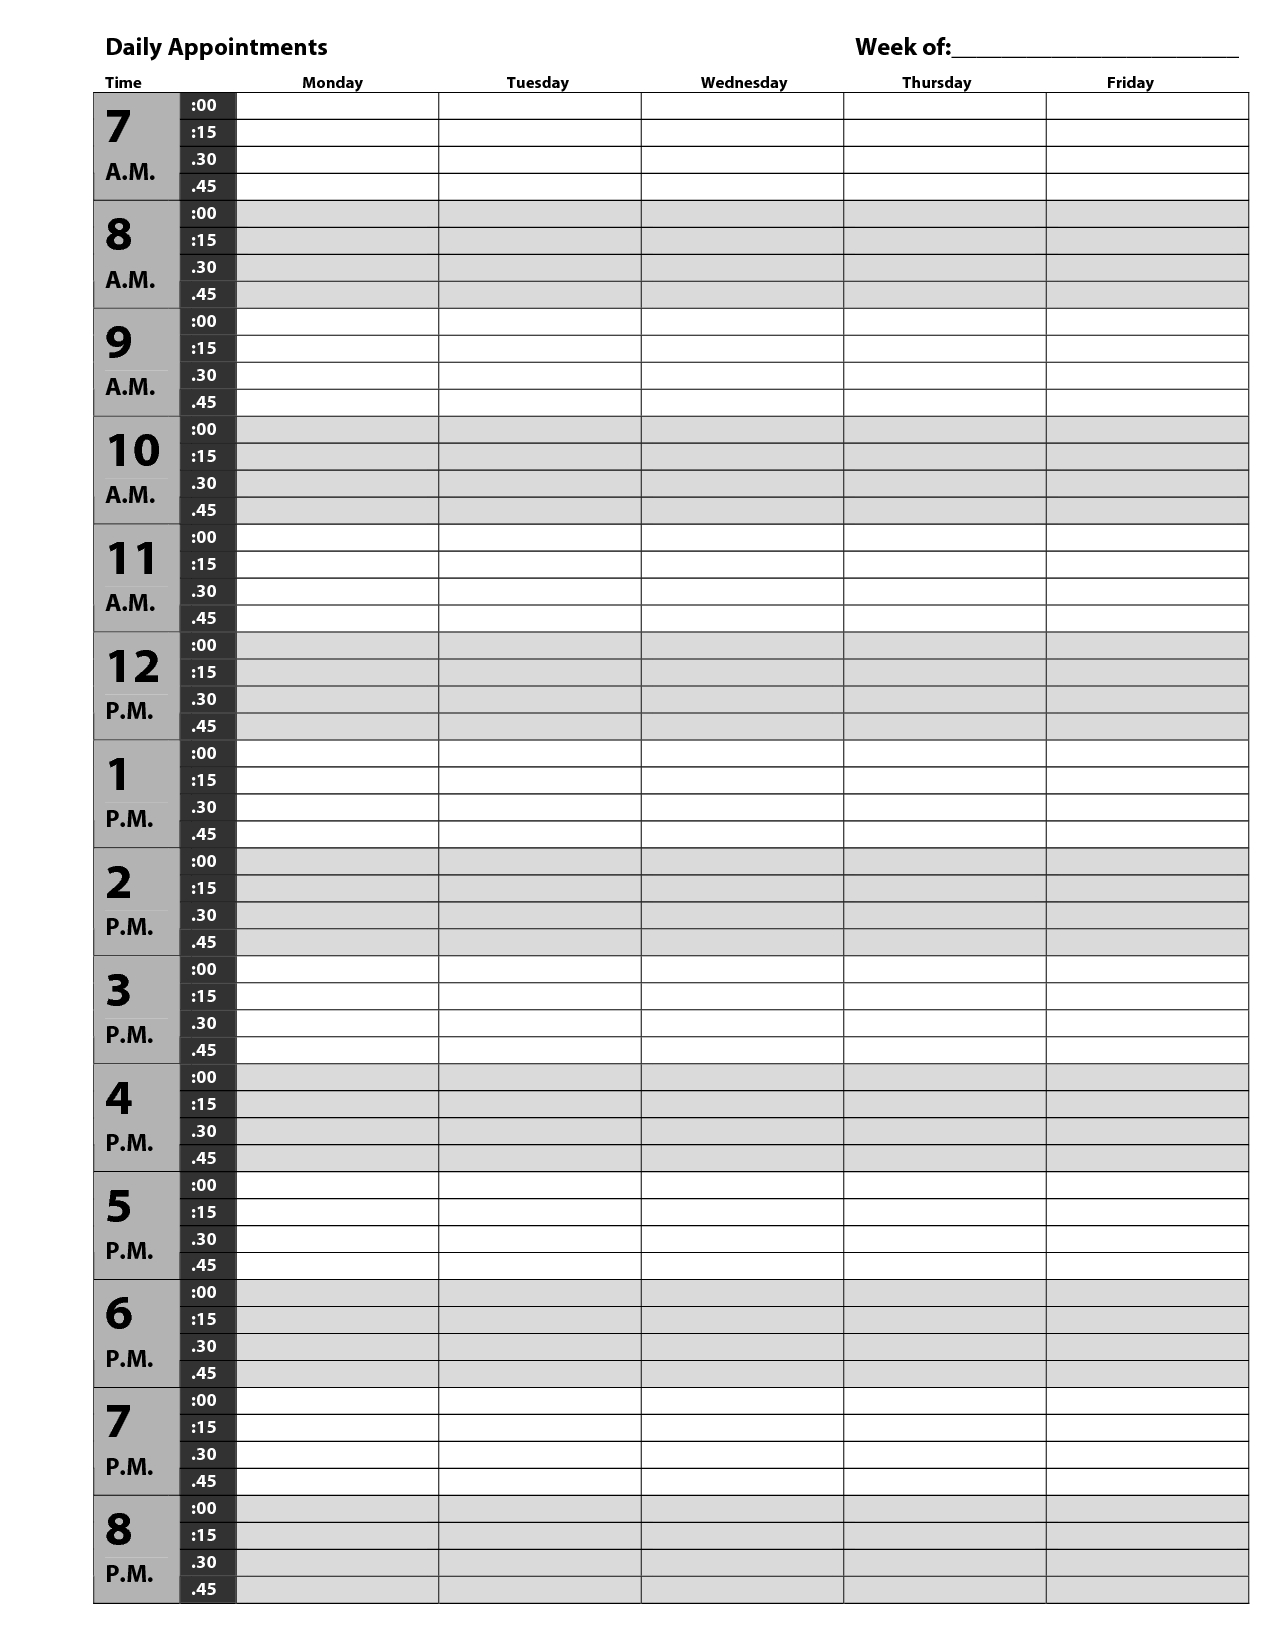 Appointment Book  Pdf | Appointment Calendar, Daily Planner regarding Daily Calendar Template 30 Minute Increments